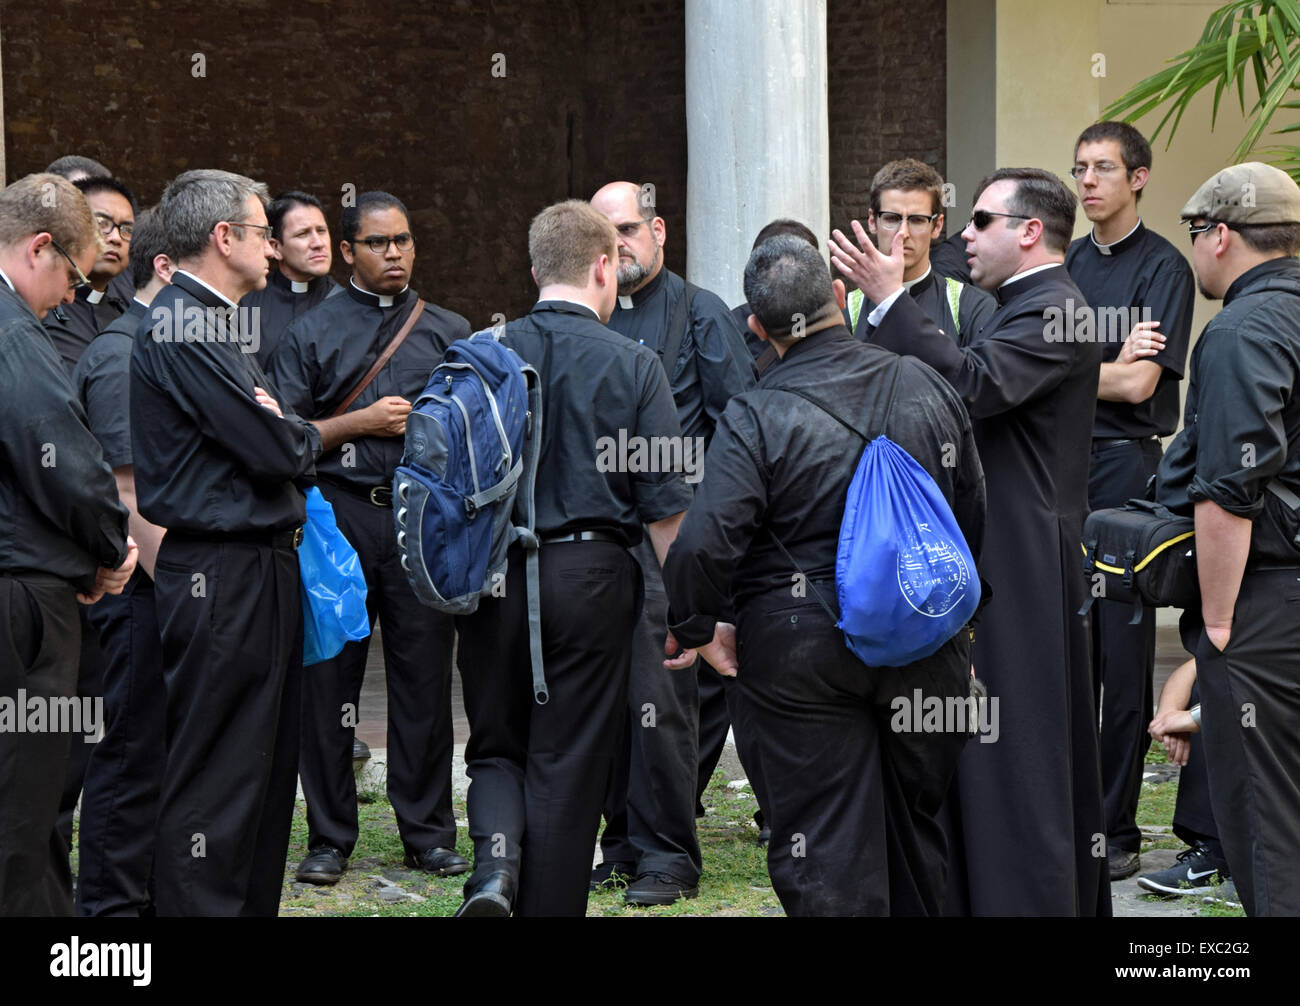 A group of priests on a tour of the Basilica of San Clemente in Rome, Italy. Stock Photo